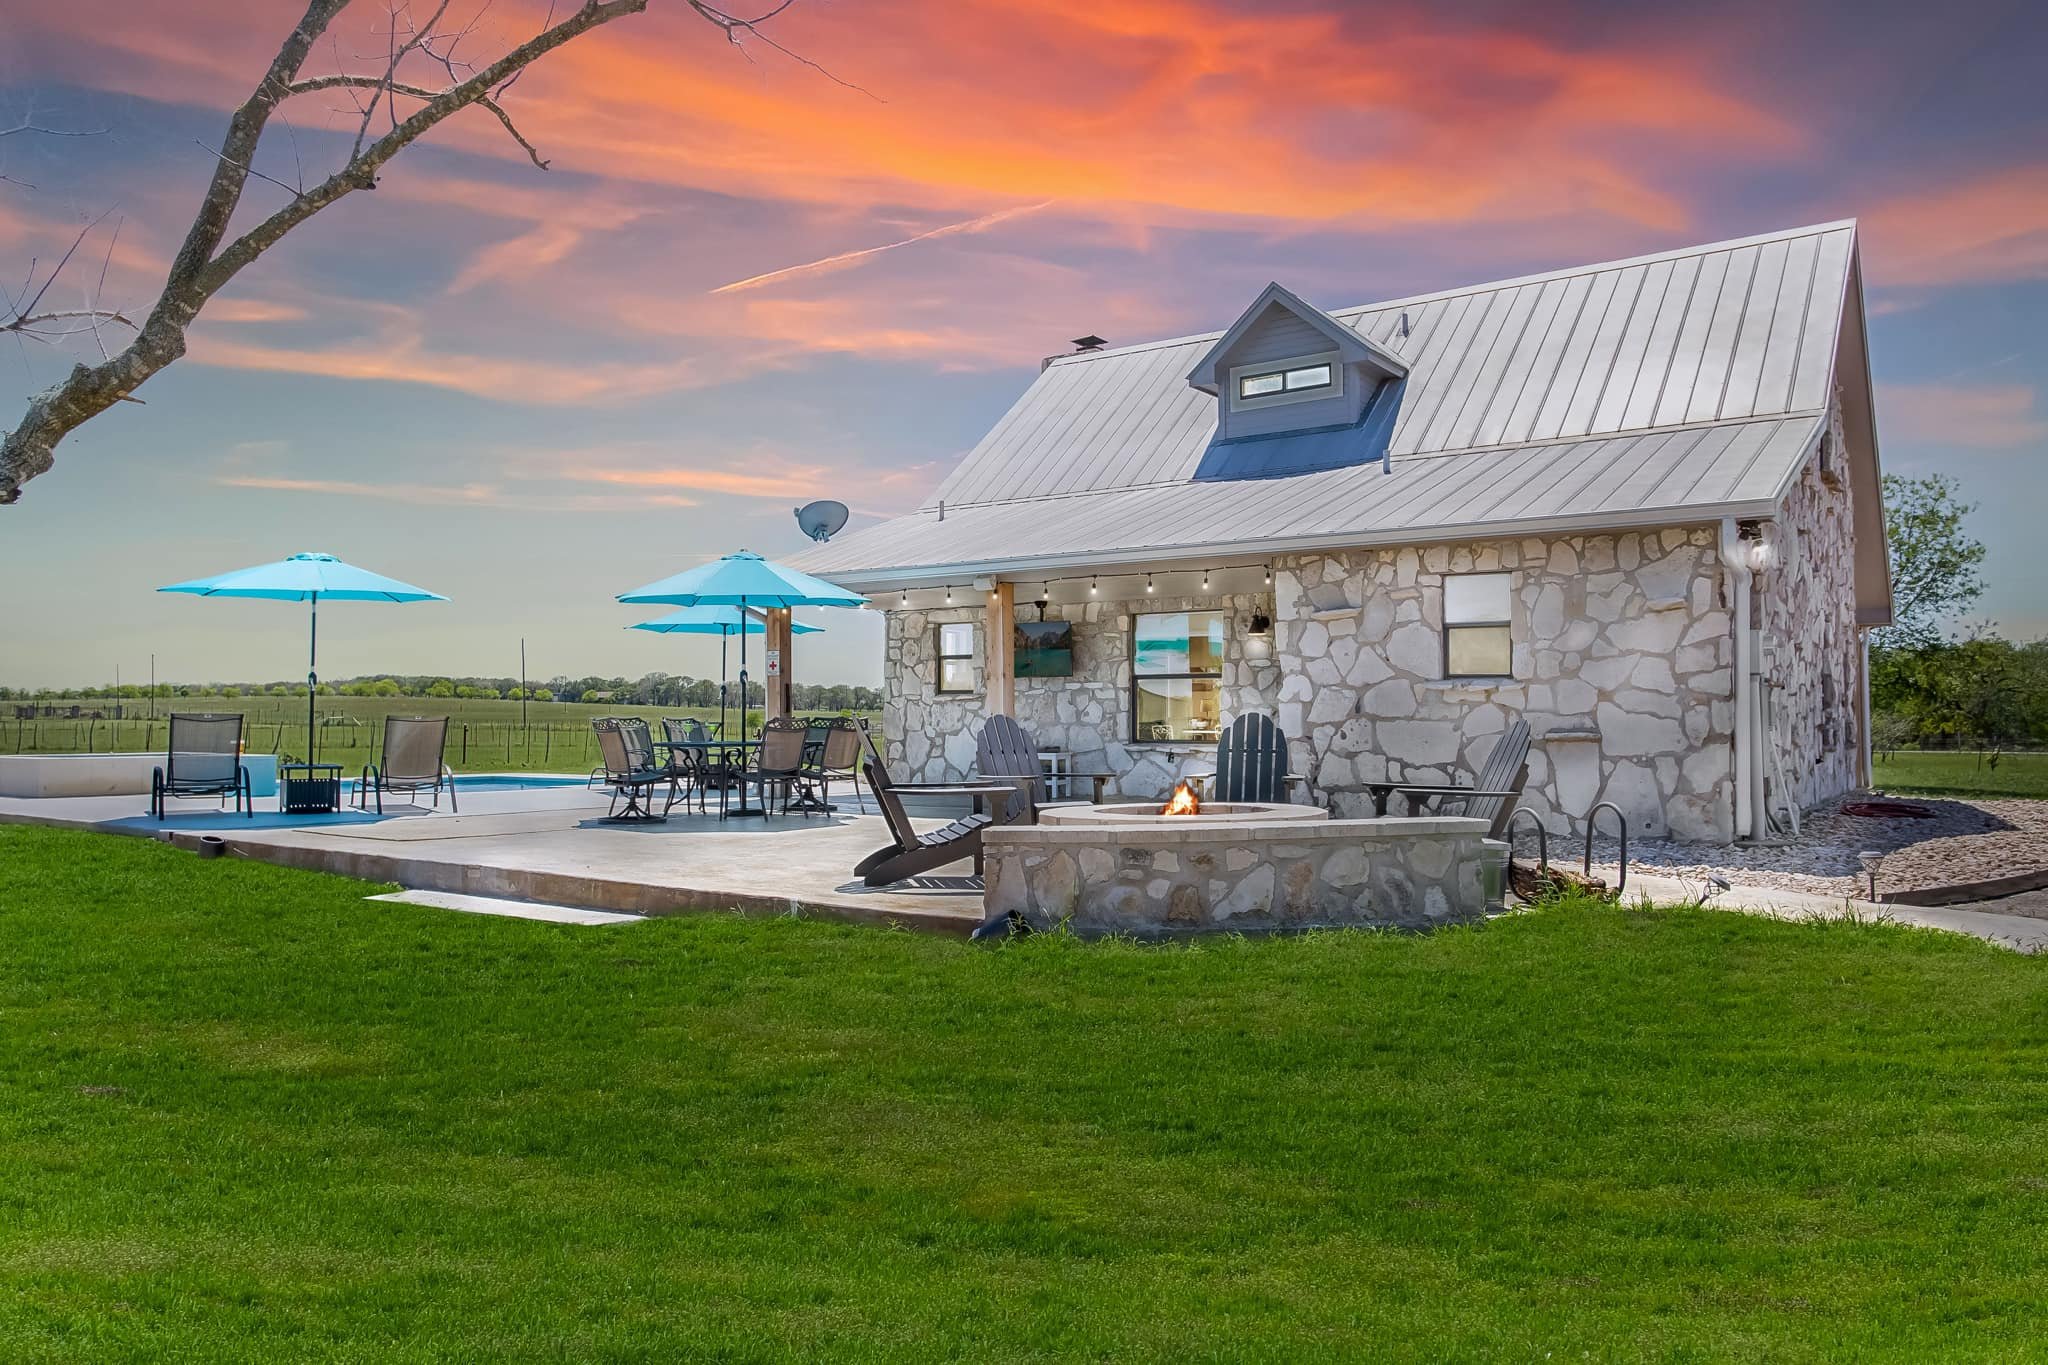 Hibernate In Texas: 16 Vacation Rentals Perfect For Snowbirds